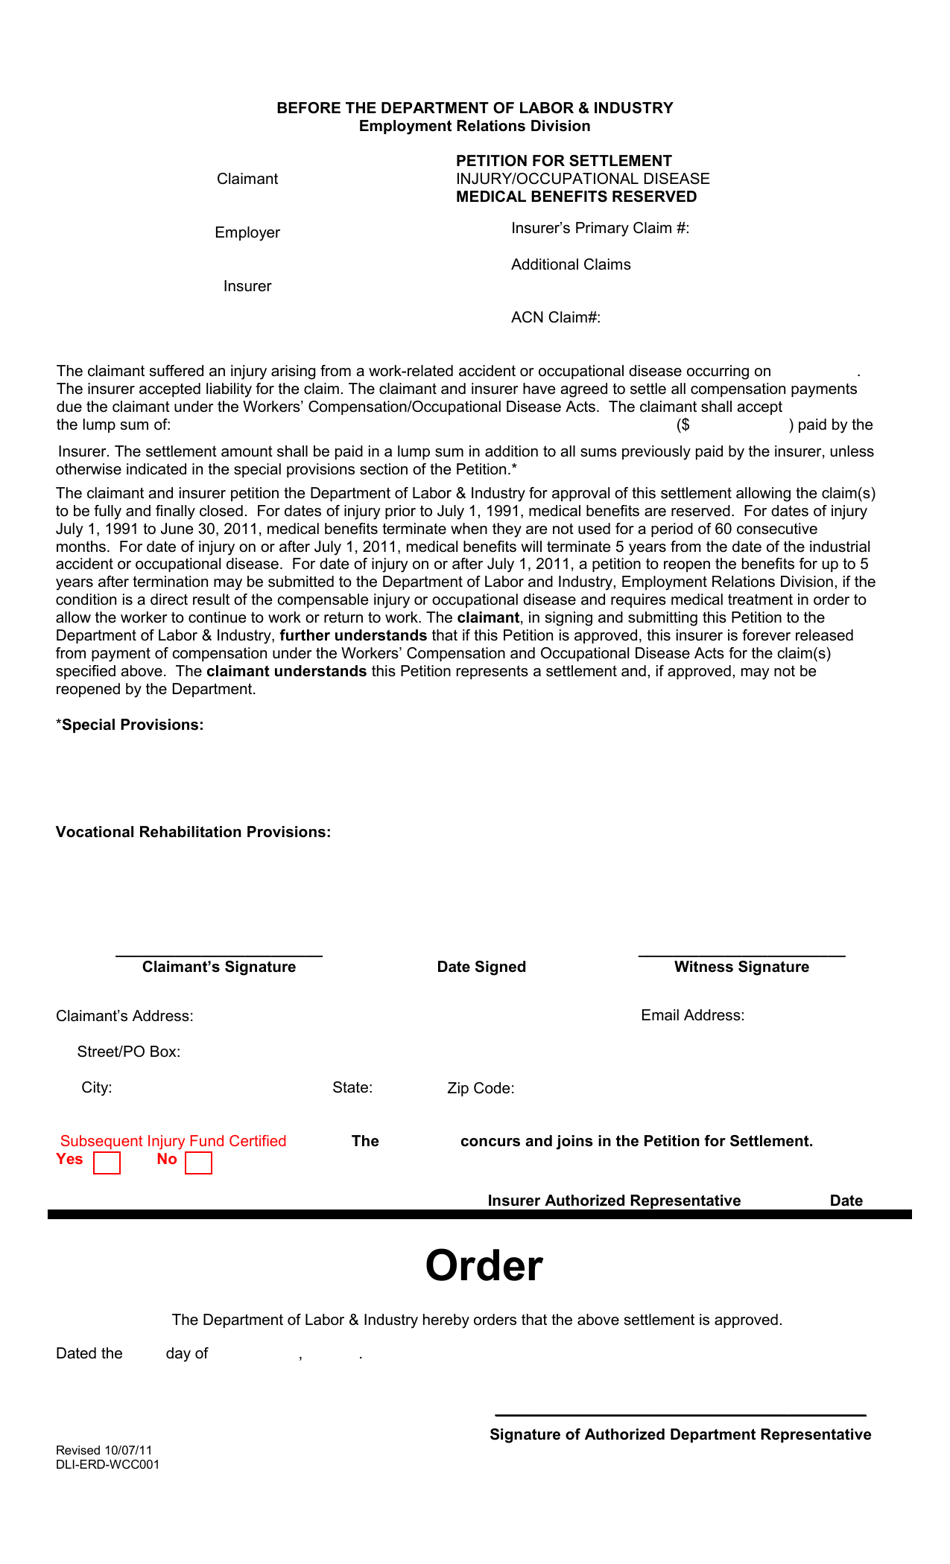 Form DLI-ERD-WCC001 Petition for Settlement - Injury / Od, Medical Benefits Reserved - Montana, Page 1